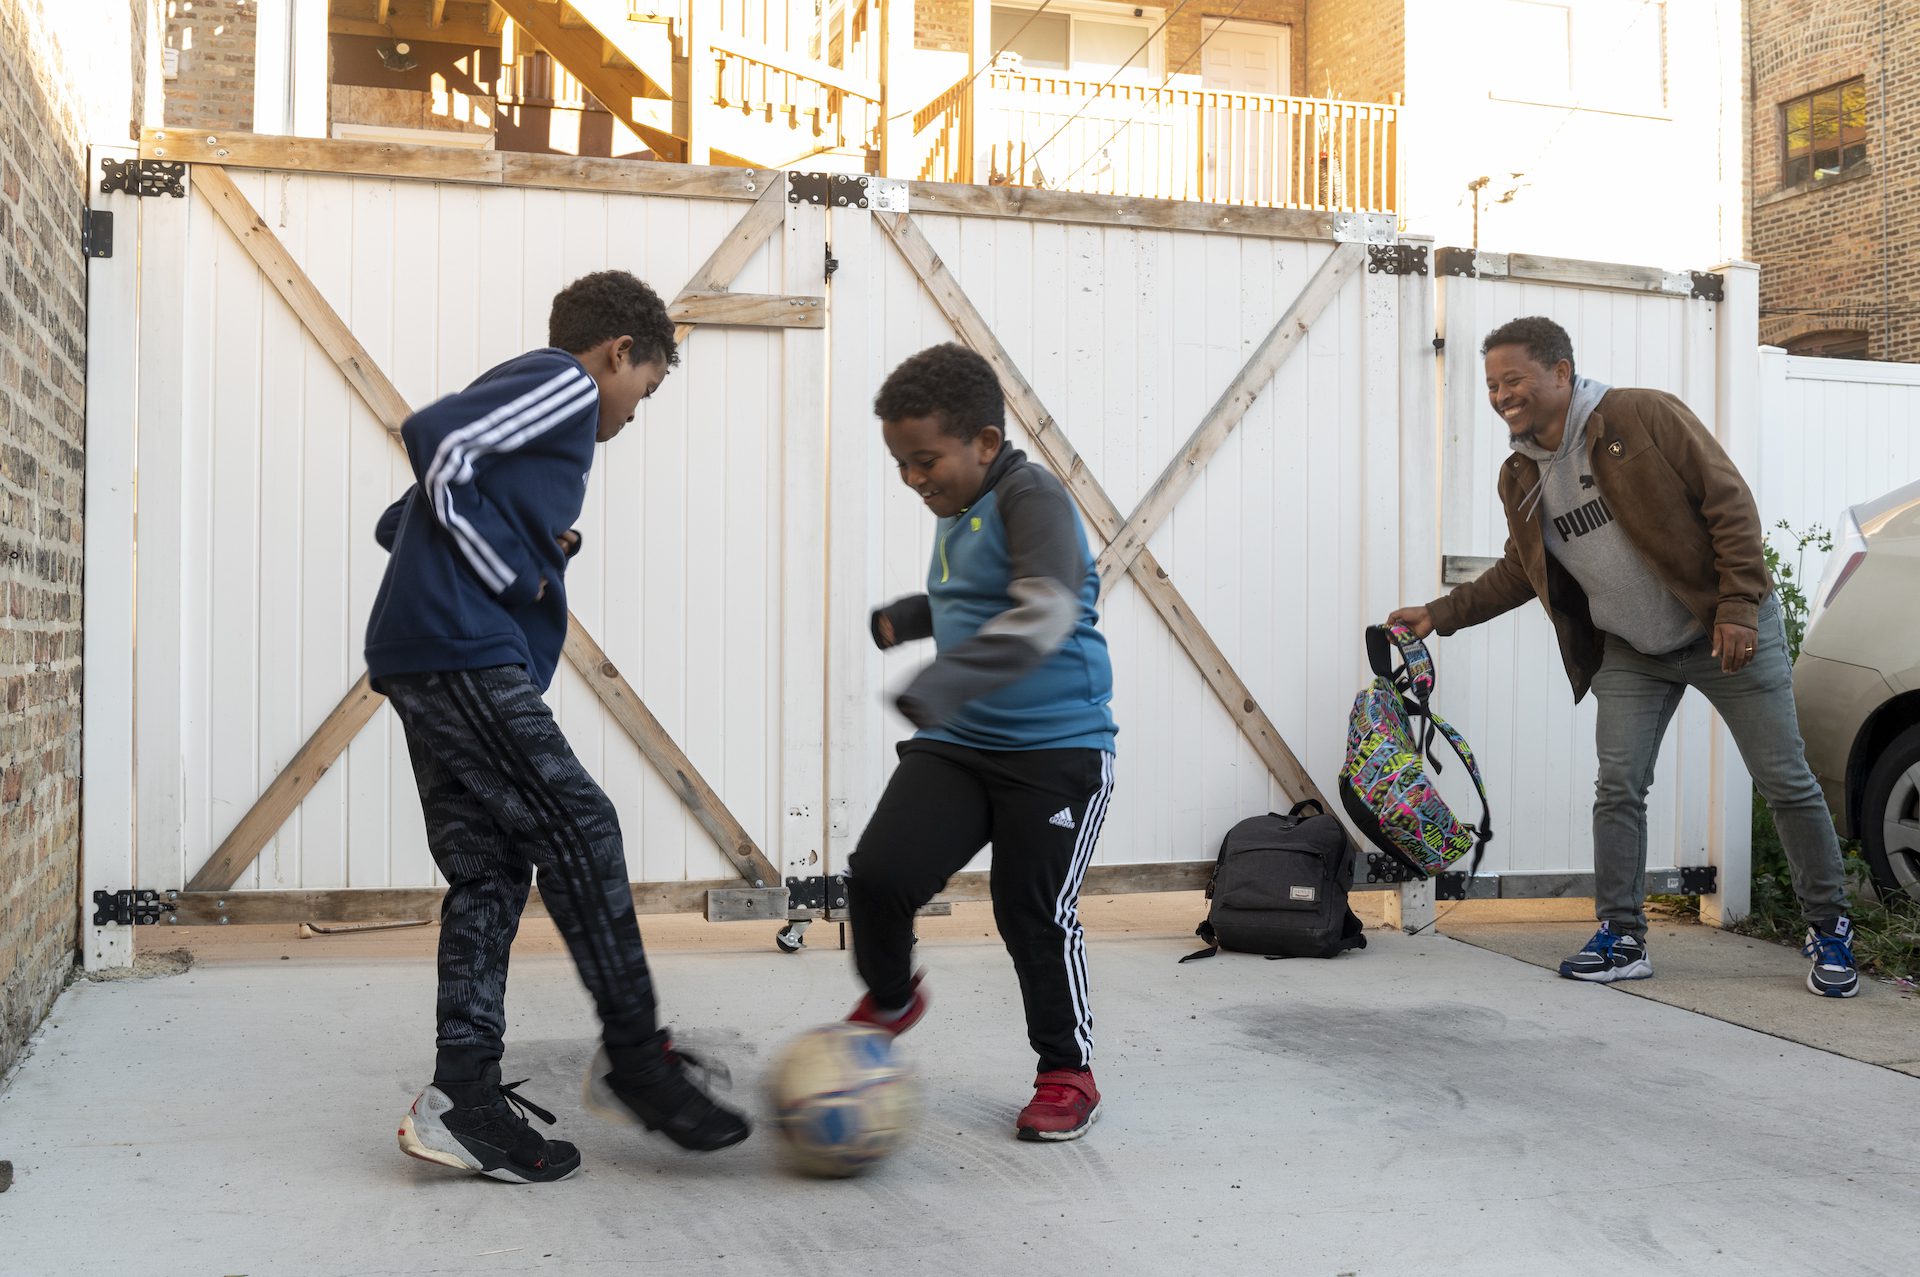 Two children play soccer as a man smiles while holding a backpack.